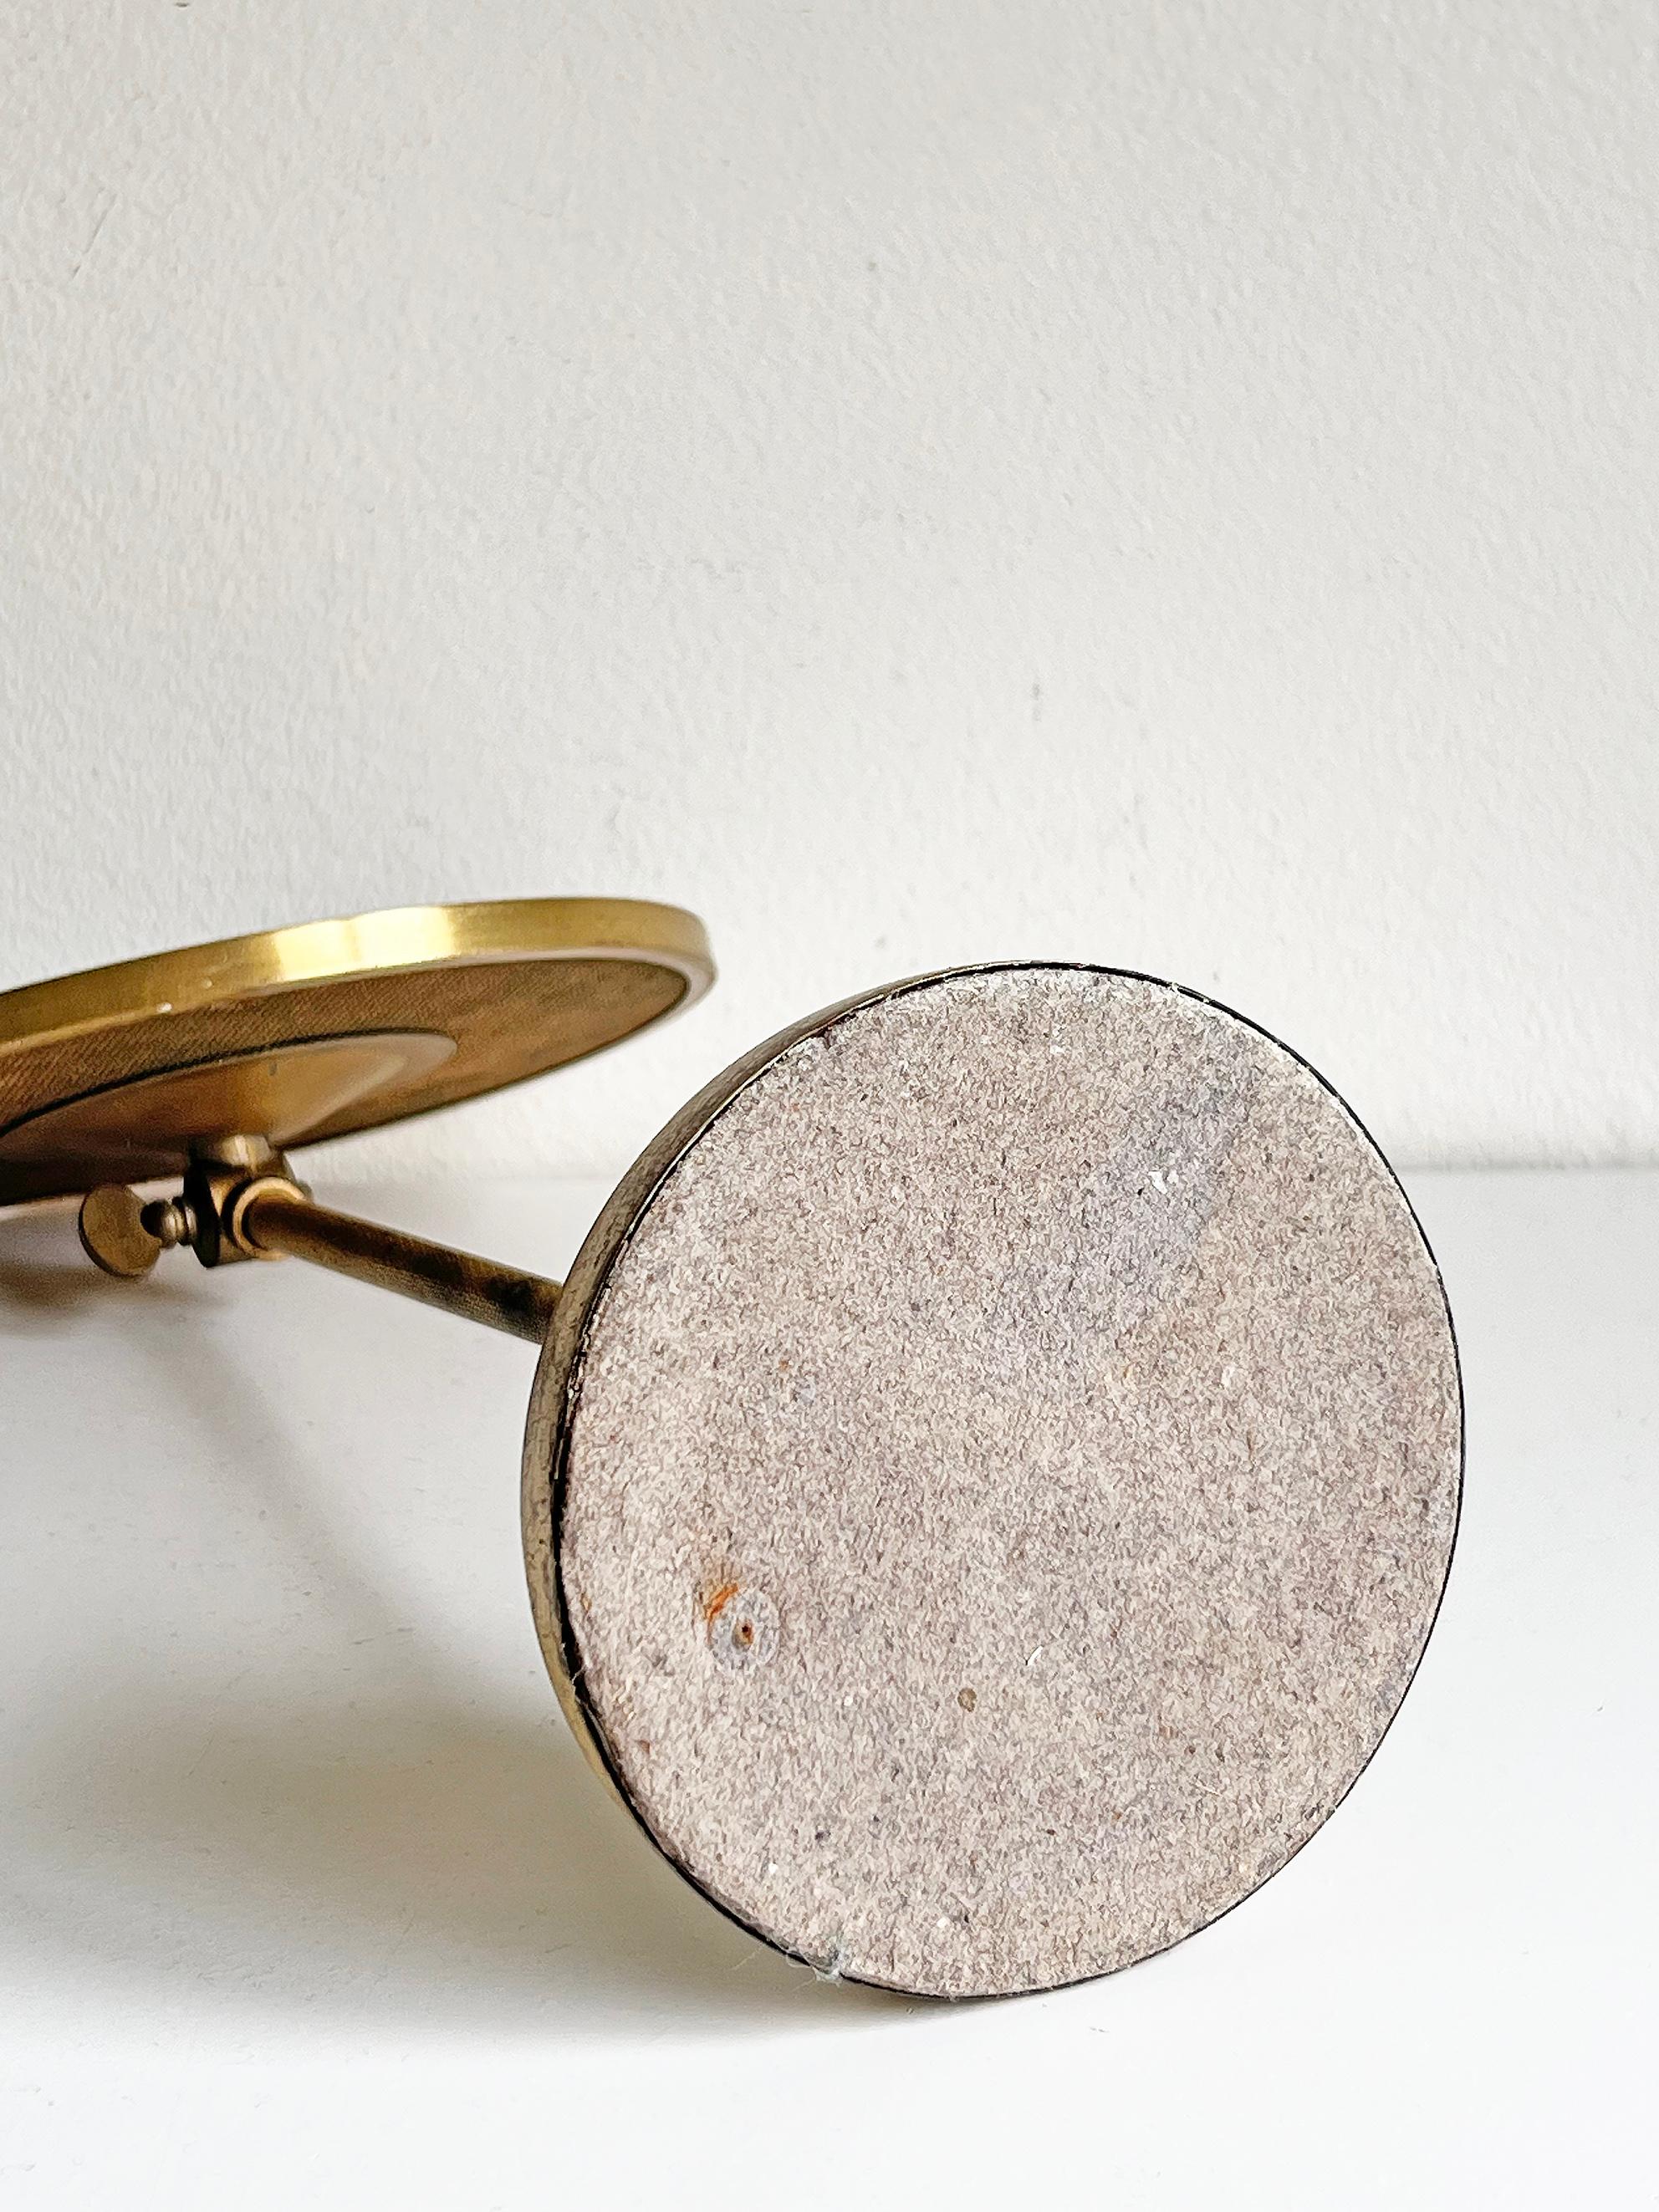 Mid-Century Modern Table Mirror in Brass, circa 1950s For Sale 5